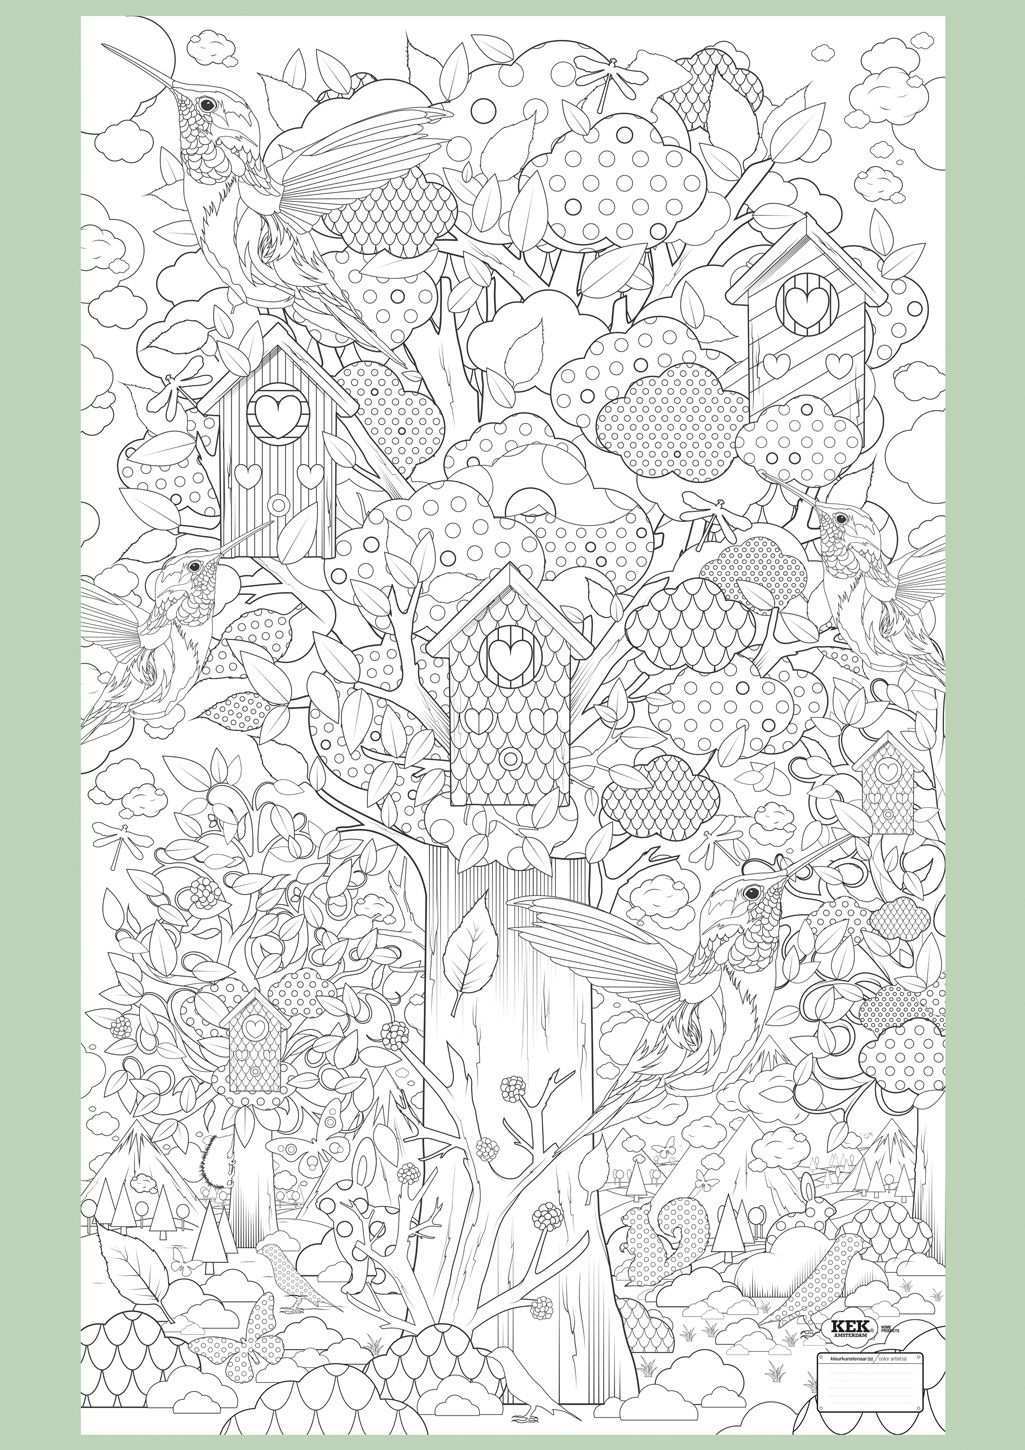 Supersized Colouring Picture In The Forest Coloriage Coloriage Geant Dessin Coloriage